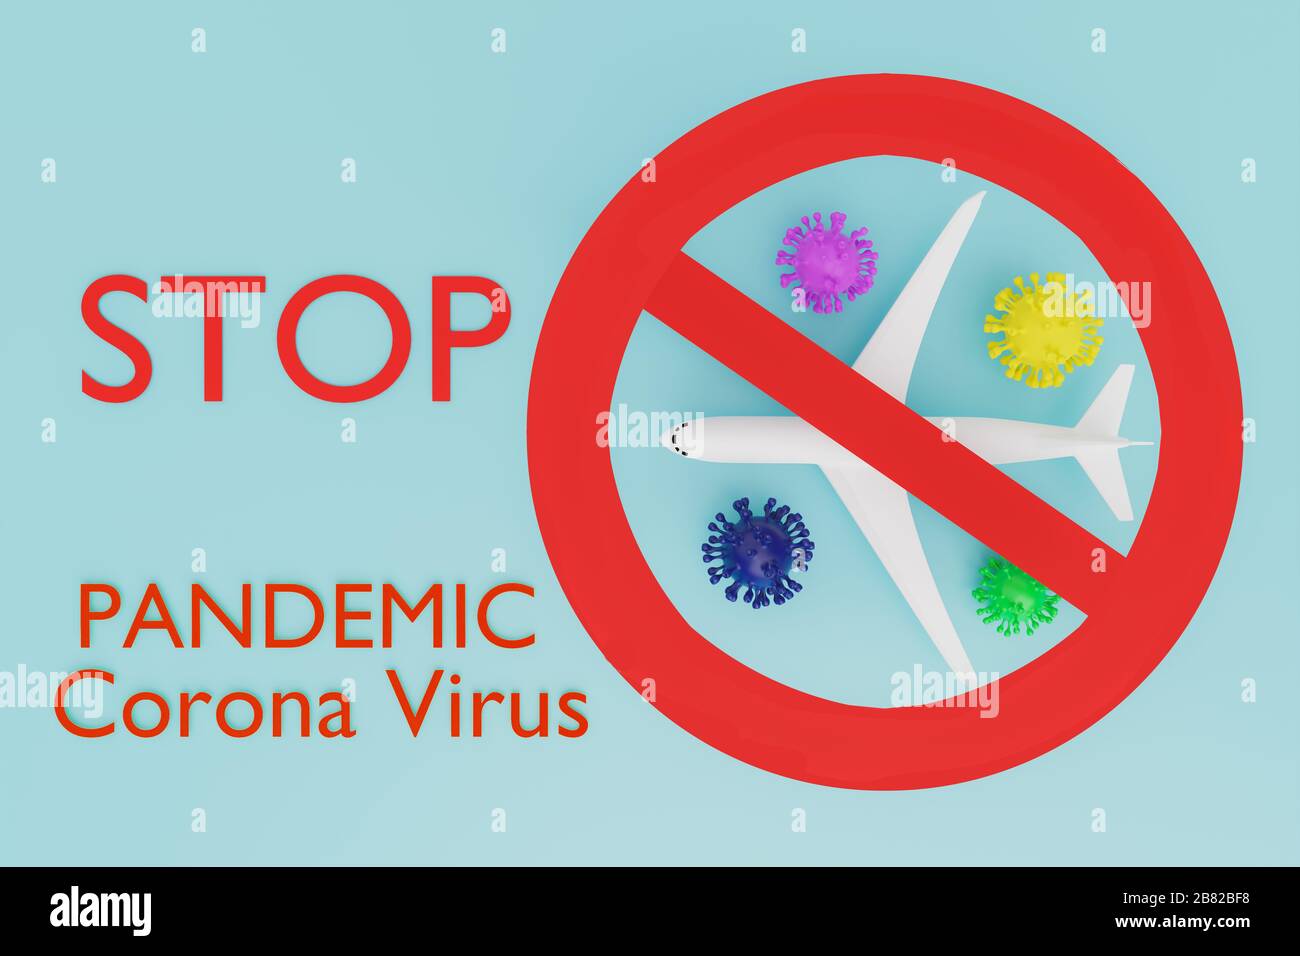 STOP Global pandemic with coronavirus COVID-19 with airplane ,stop pandemic Stop traveling Stop trip STOP the spread of germs COVID-19,3D illustration Stock Photo